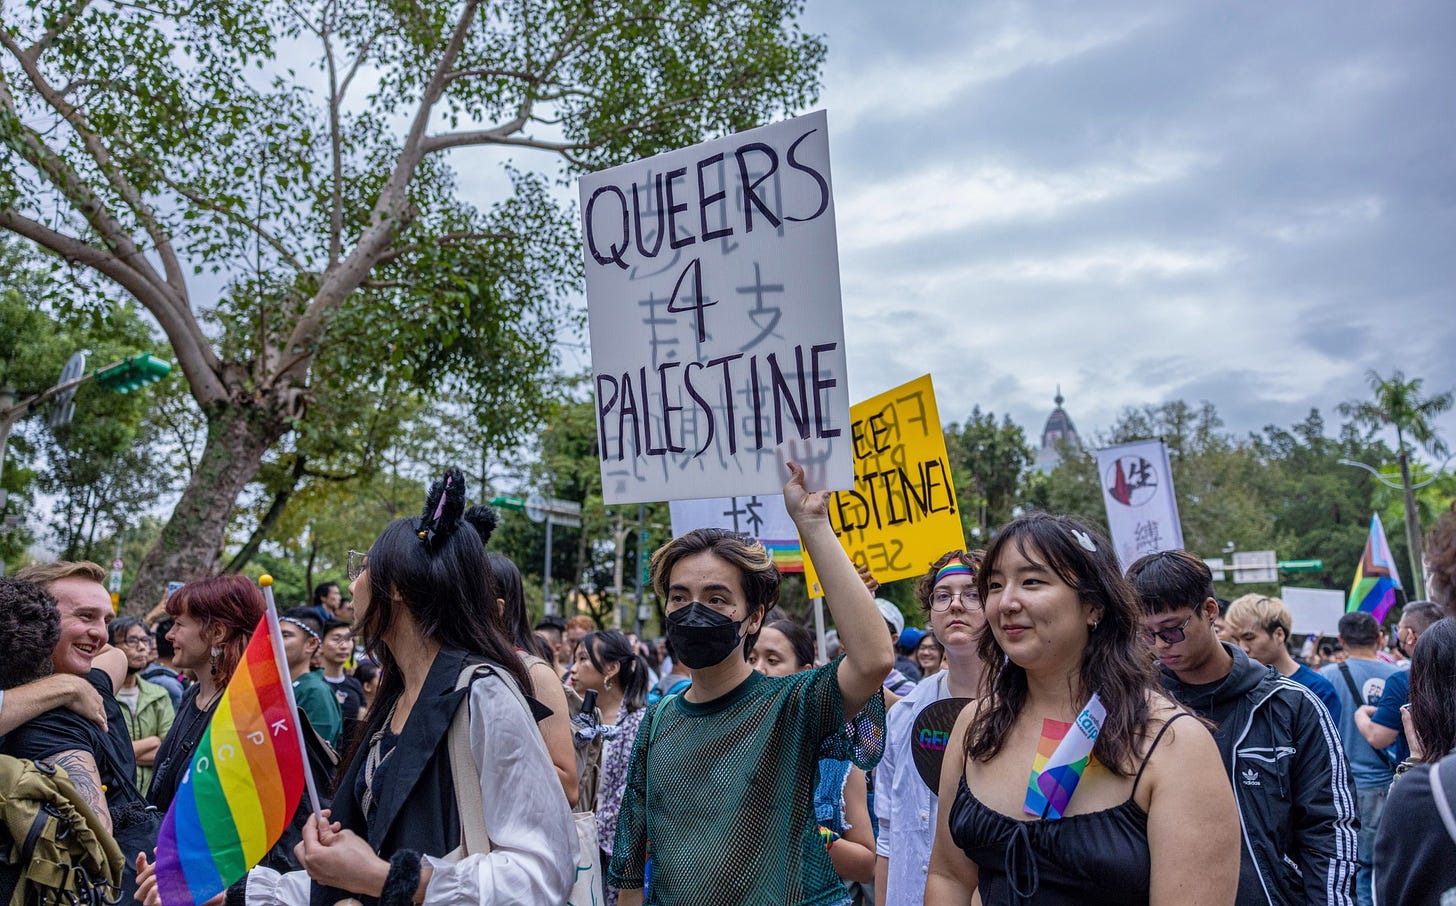 Queers for Palestine” must have a death wish